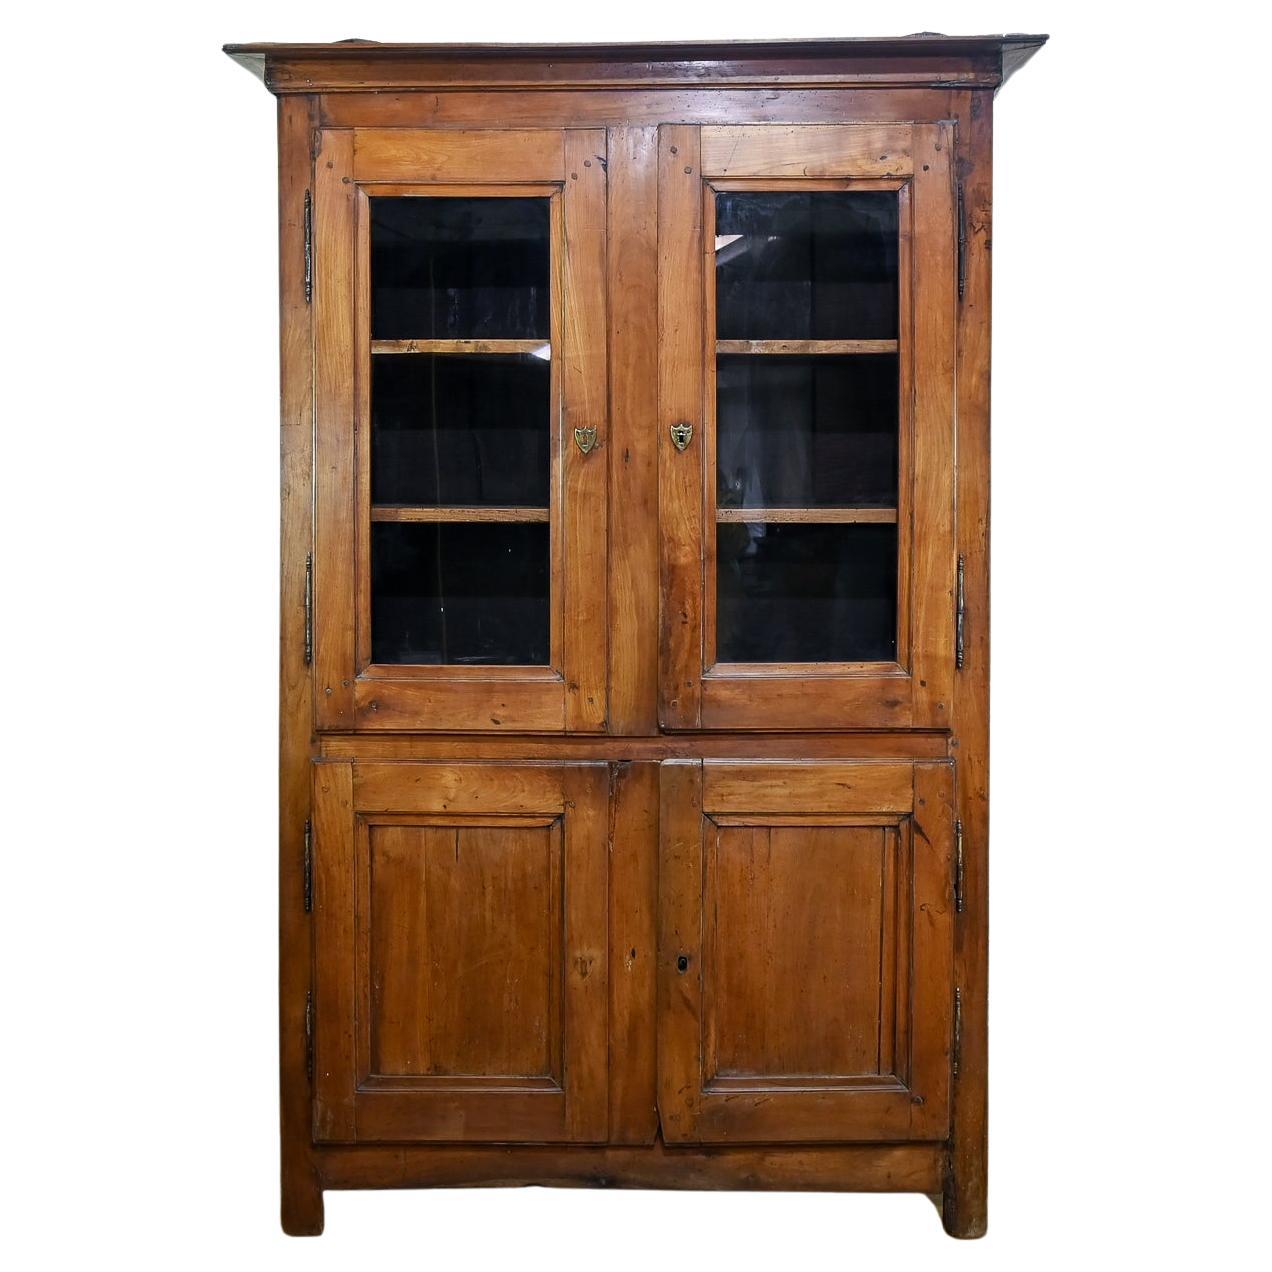 A Charming Mid 19th Century French Cherrywood Glazed Cabinet Bookcase For Sale